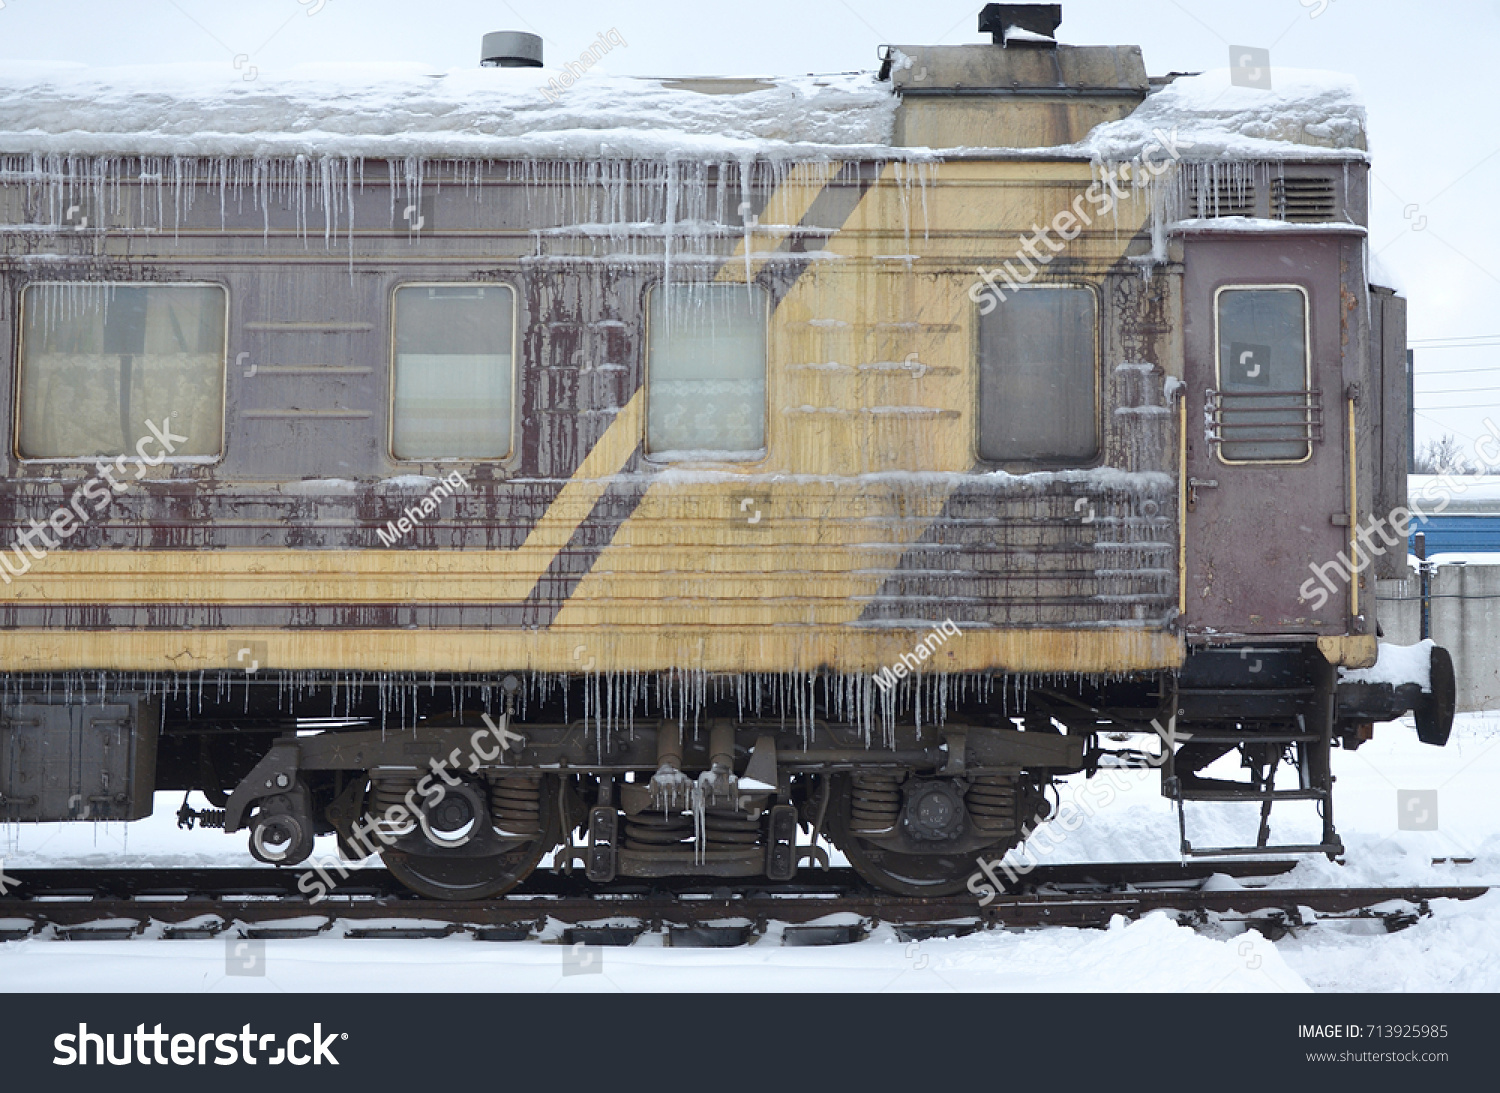 Detailed photo of a frozen car passenger train with icicles and ice on its surface. Railway in the cold winter season #713925985